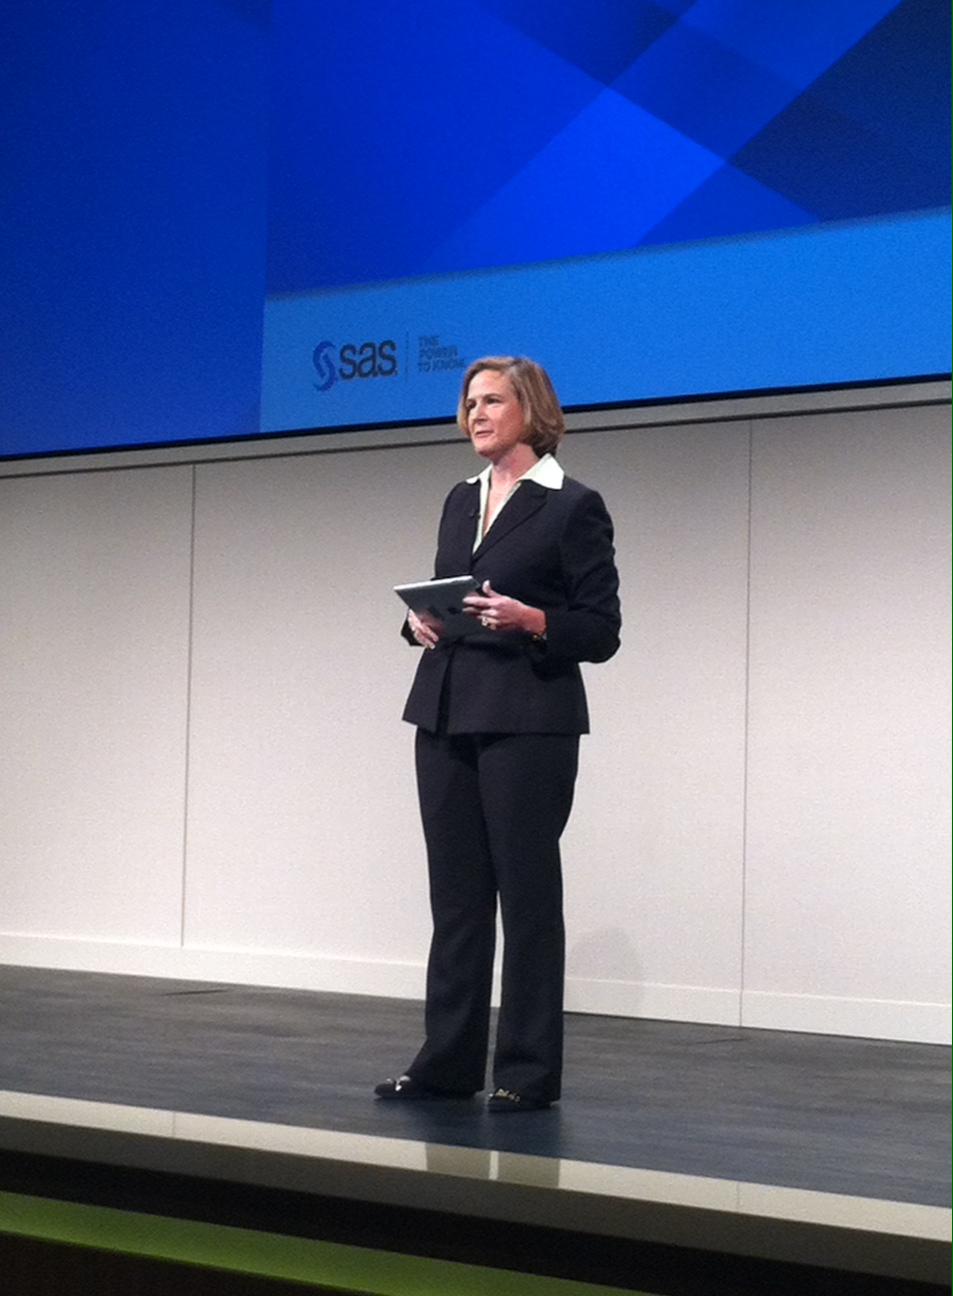 Kecia Serwin, Vice President and General Manager of SAS Health Care & Life Sciences.